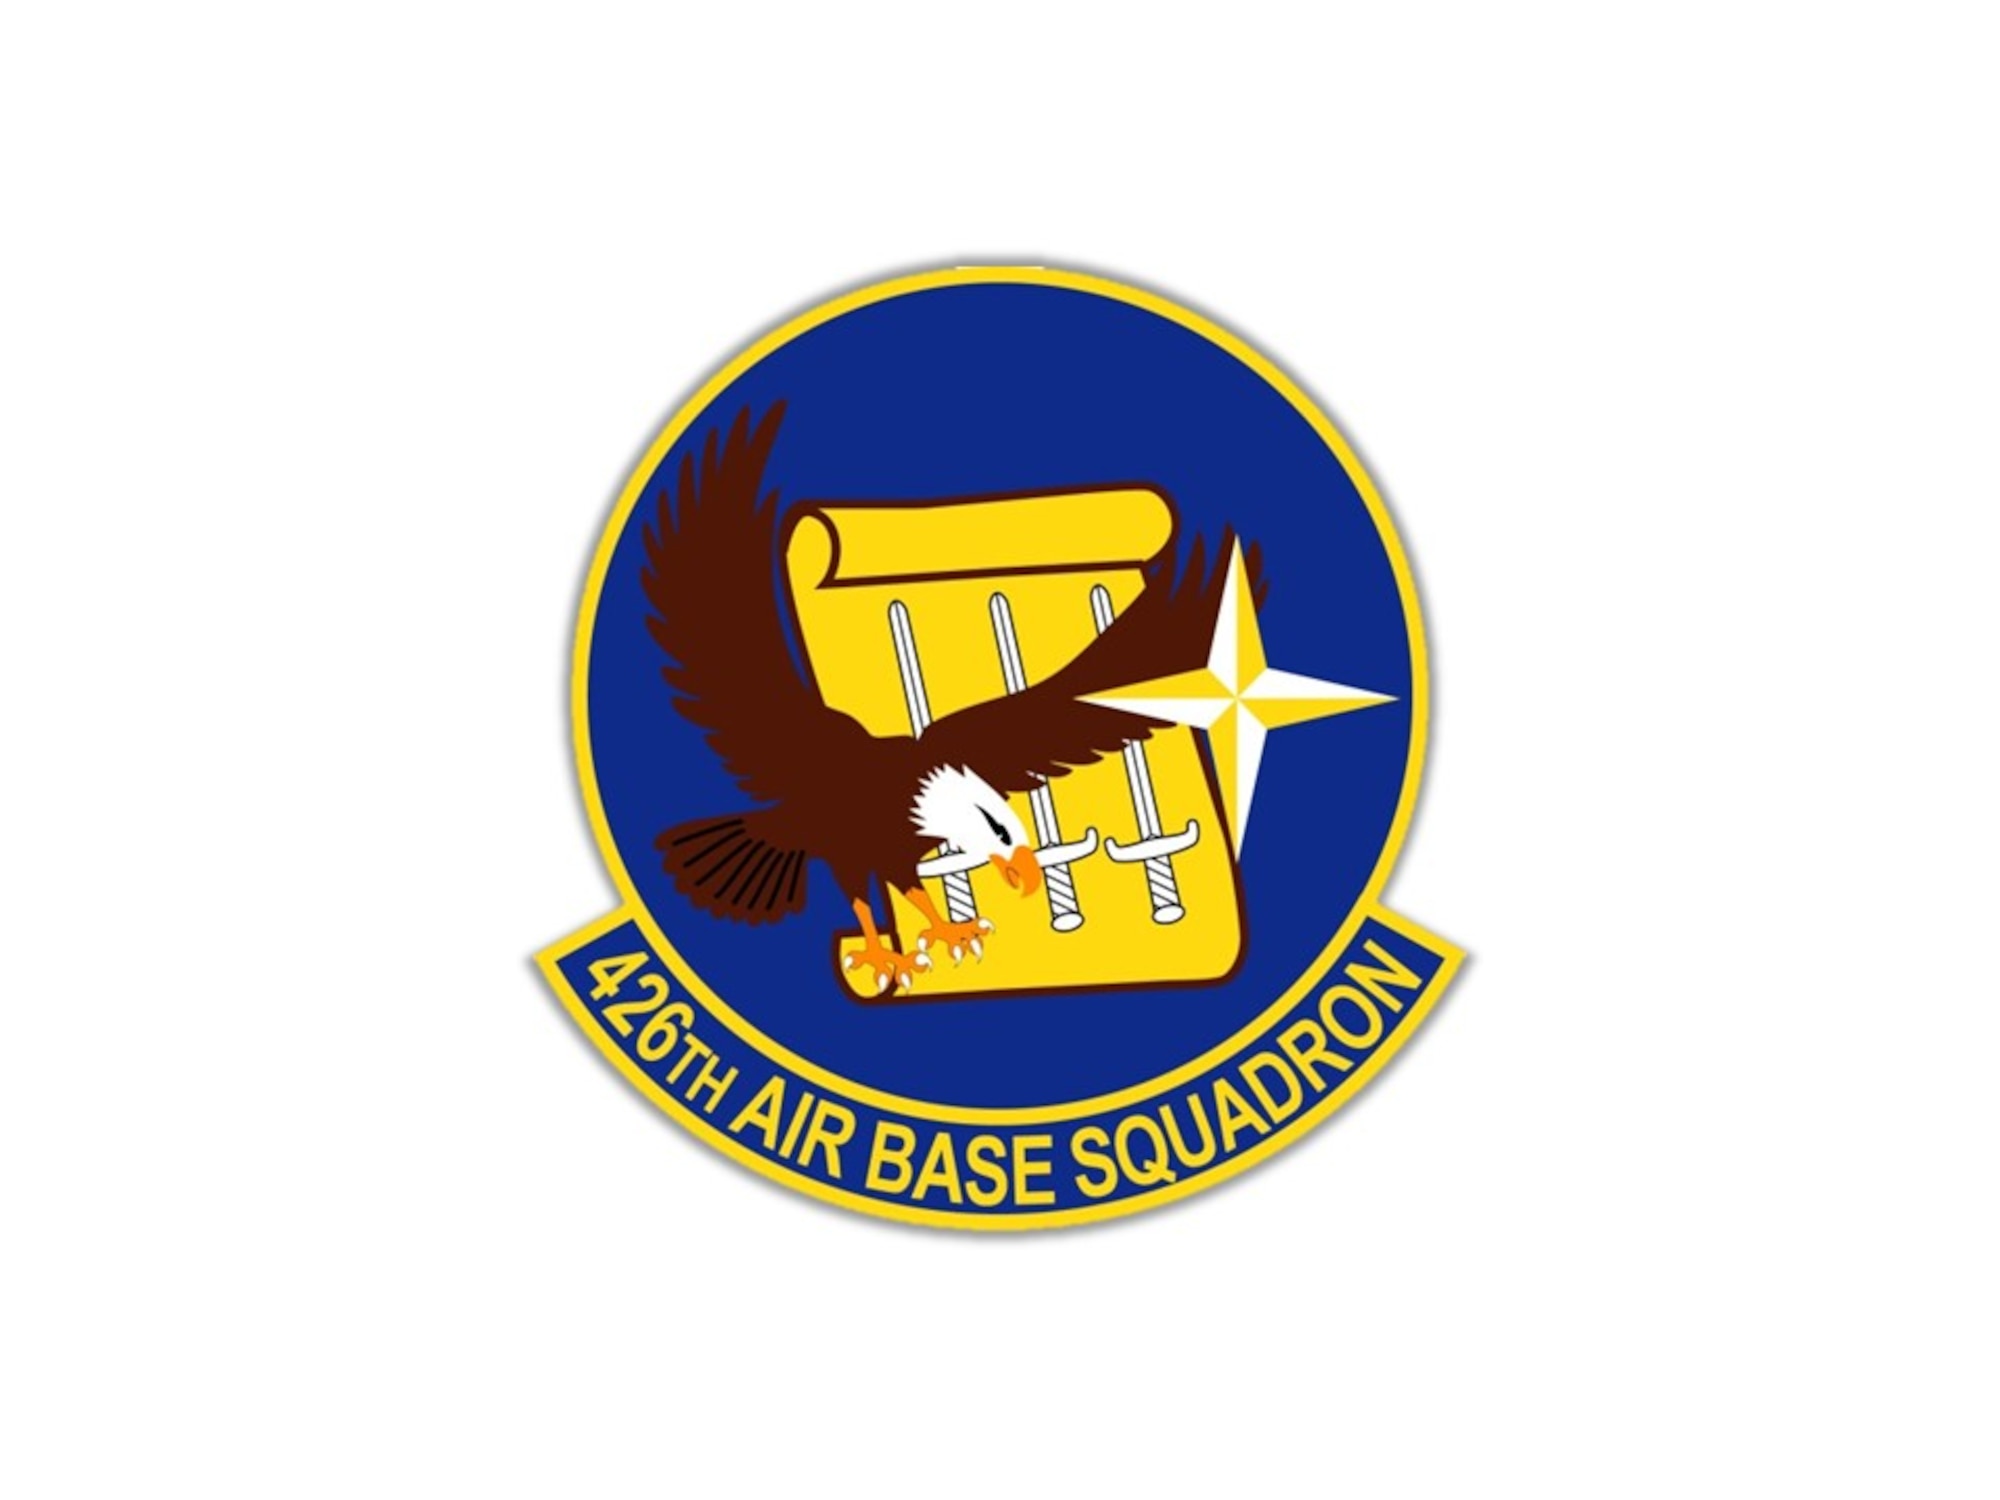 The shield of the 426th Air Base Squadron includes several elements of special significance.  The Eagle is a symbol of our nation, the United States of America.  The compass rose is the symbol of the North Atlantic Treaty Organization; the United States and Norway are founding members of the 29-member Alliance.  The three swords represent the Sverd i fjell, a local monument on the shore of the Hafjrsfjord where in the year 872 following the Battle of Hafjrsfjord, Harald håfagre united all of Norway as one Kingdom. (Courtesy photo)